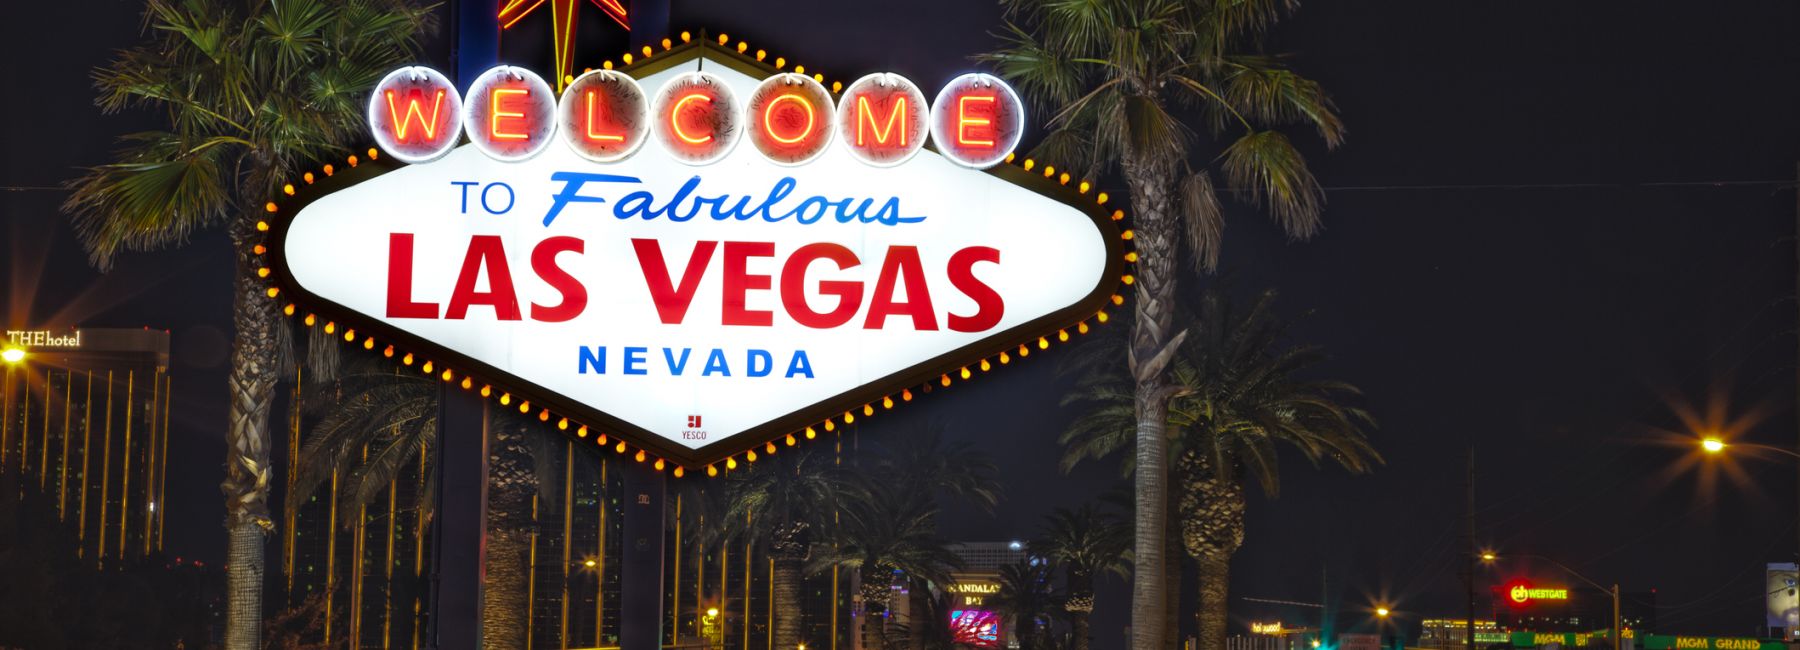 Welcome to fabulous Las Vegas sign at night